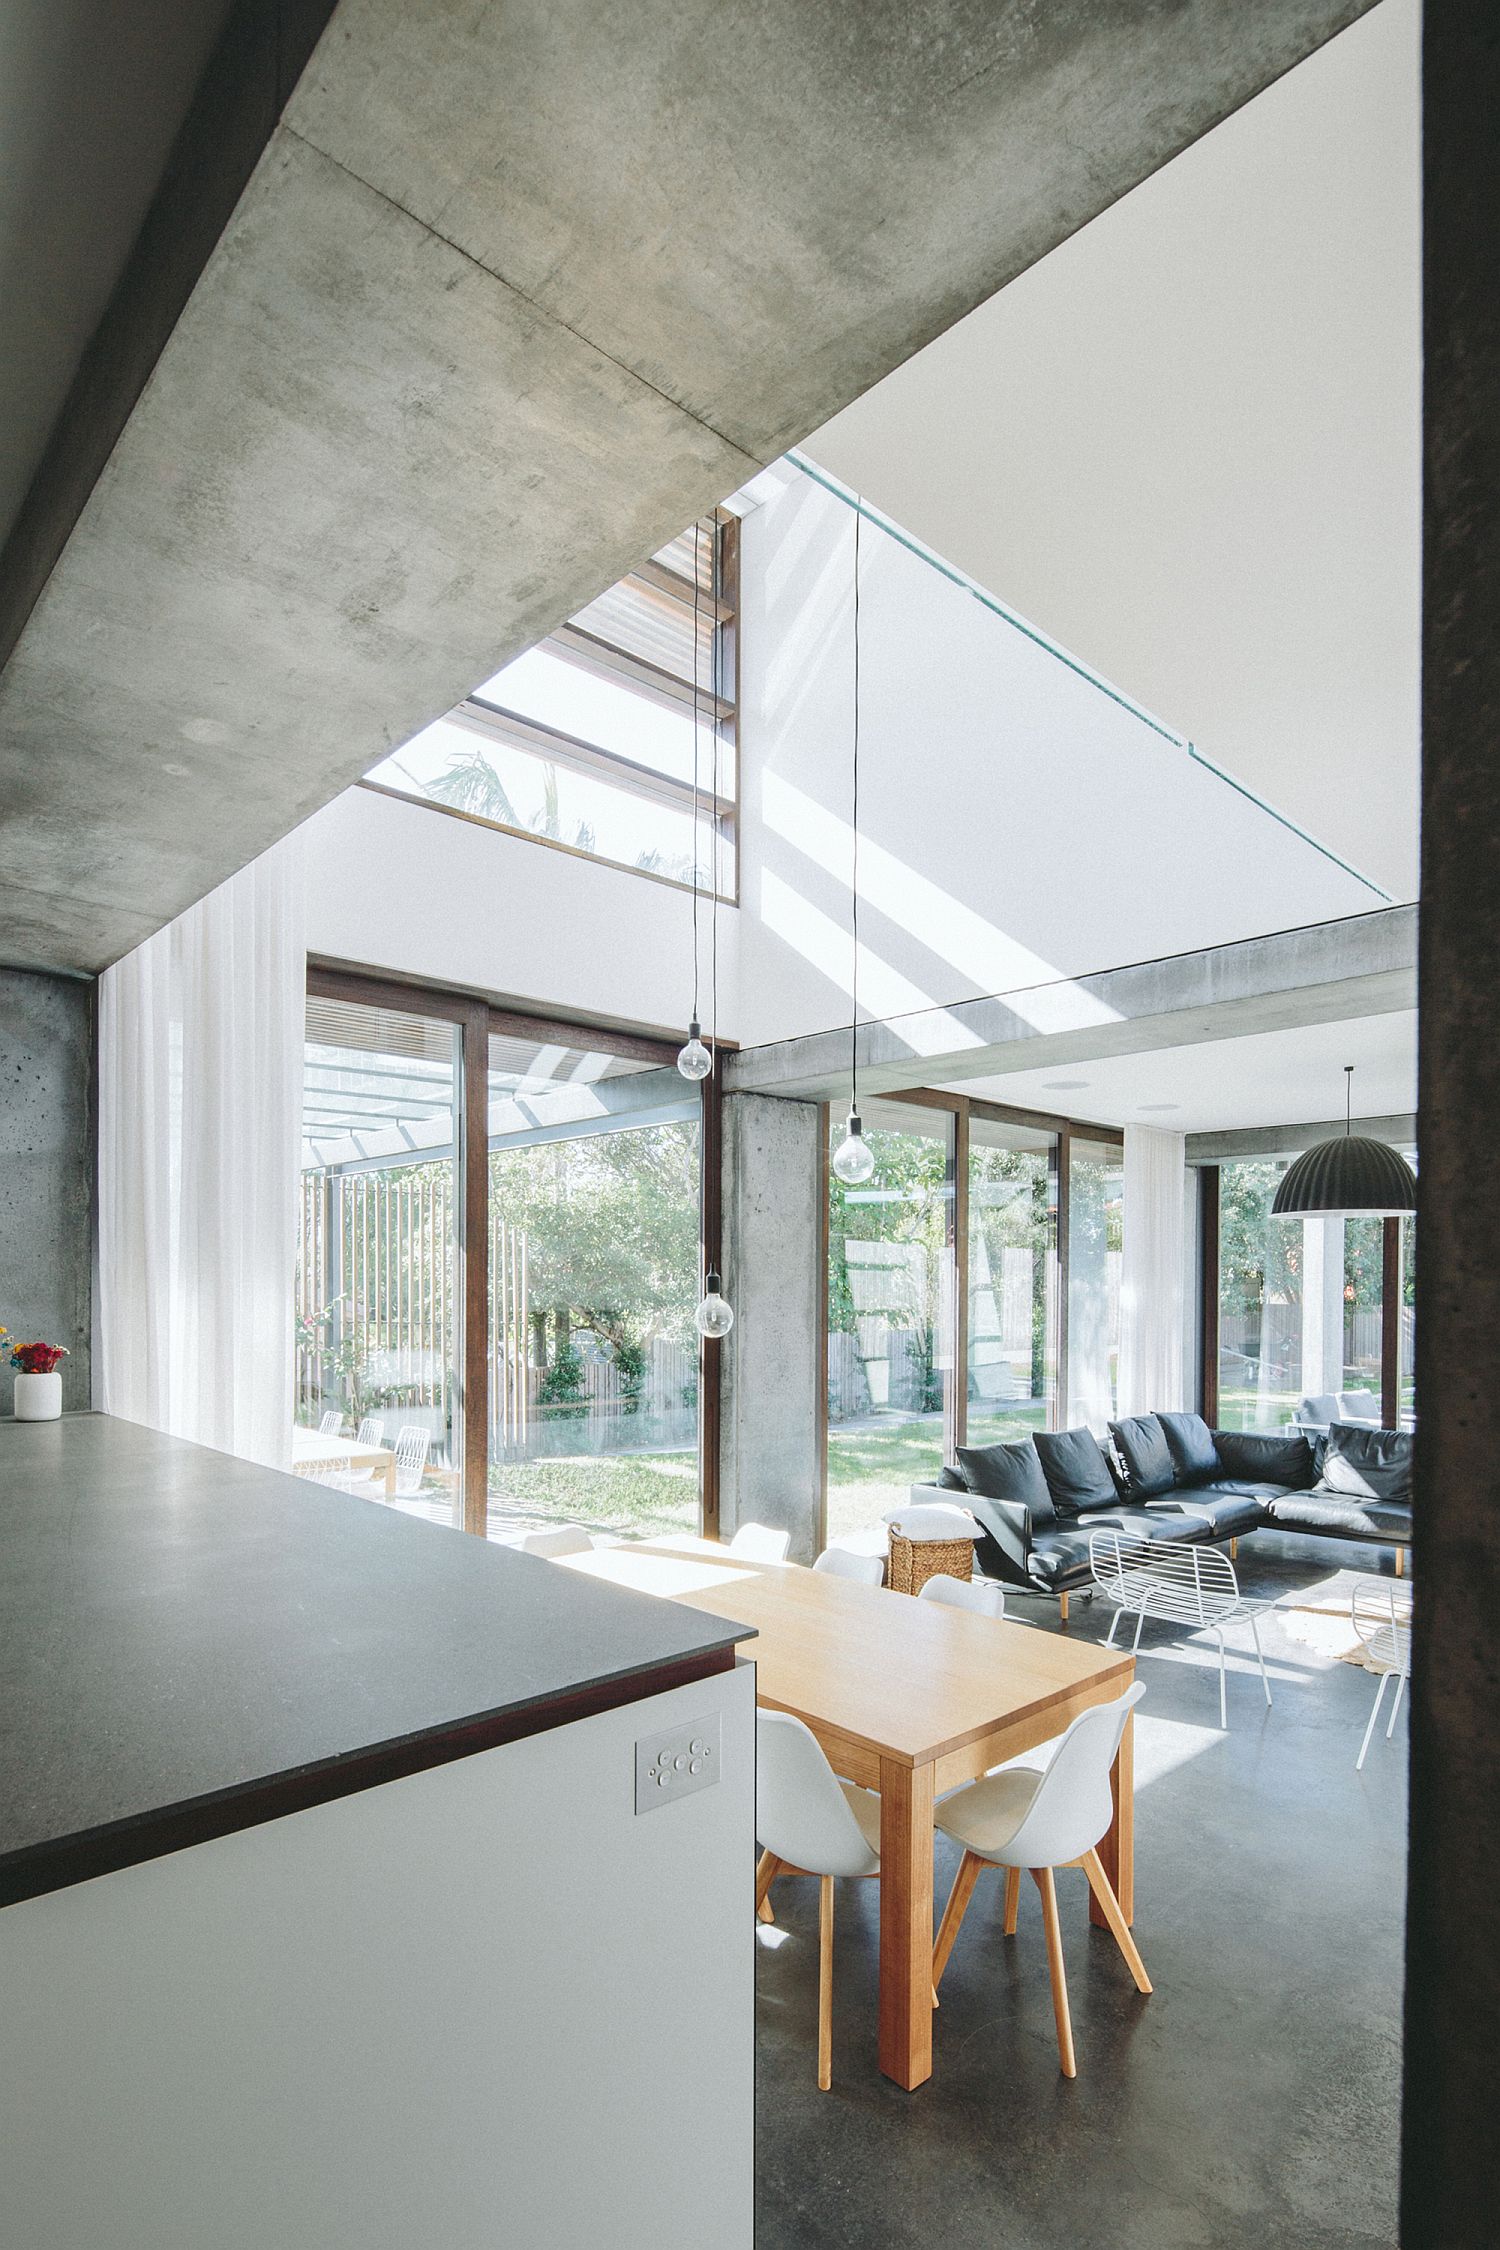 Concrete-slabs-wood-and-polished-interior-shape-the-house-with-sweeping-public-areas